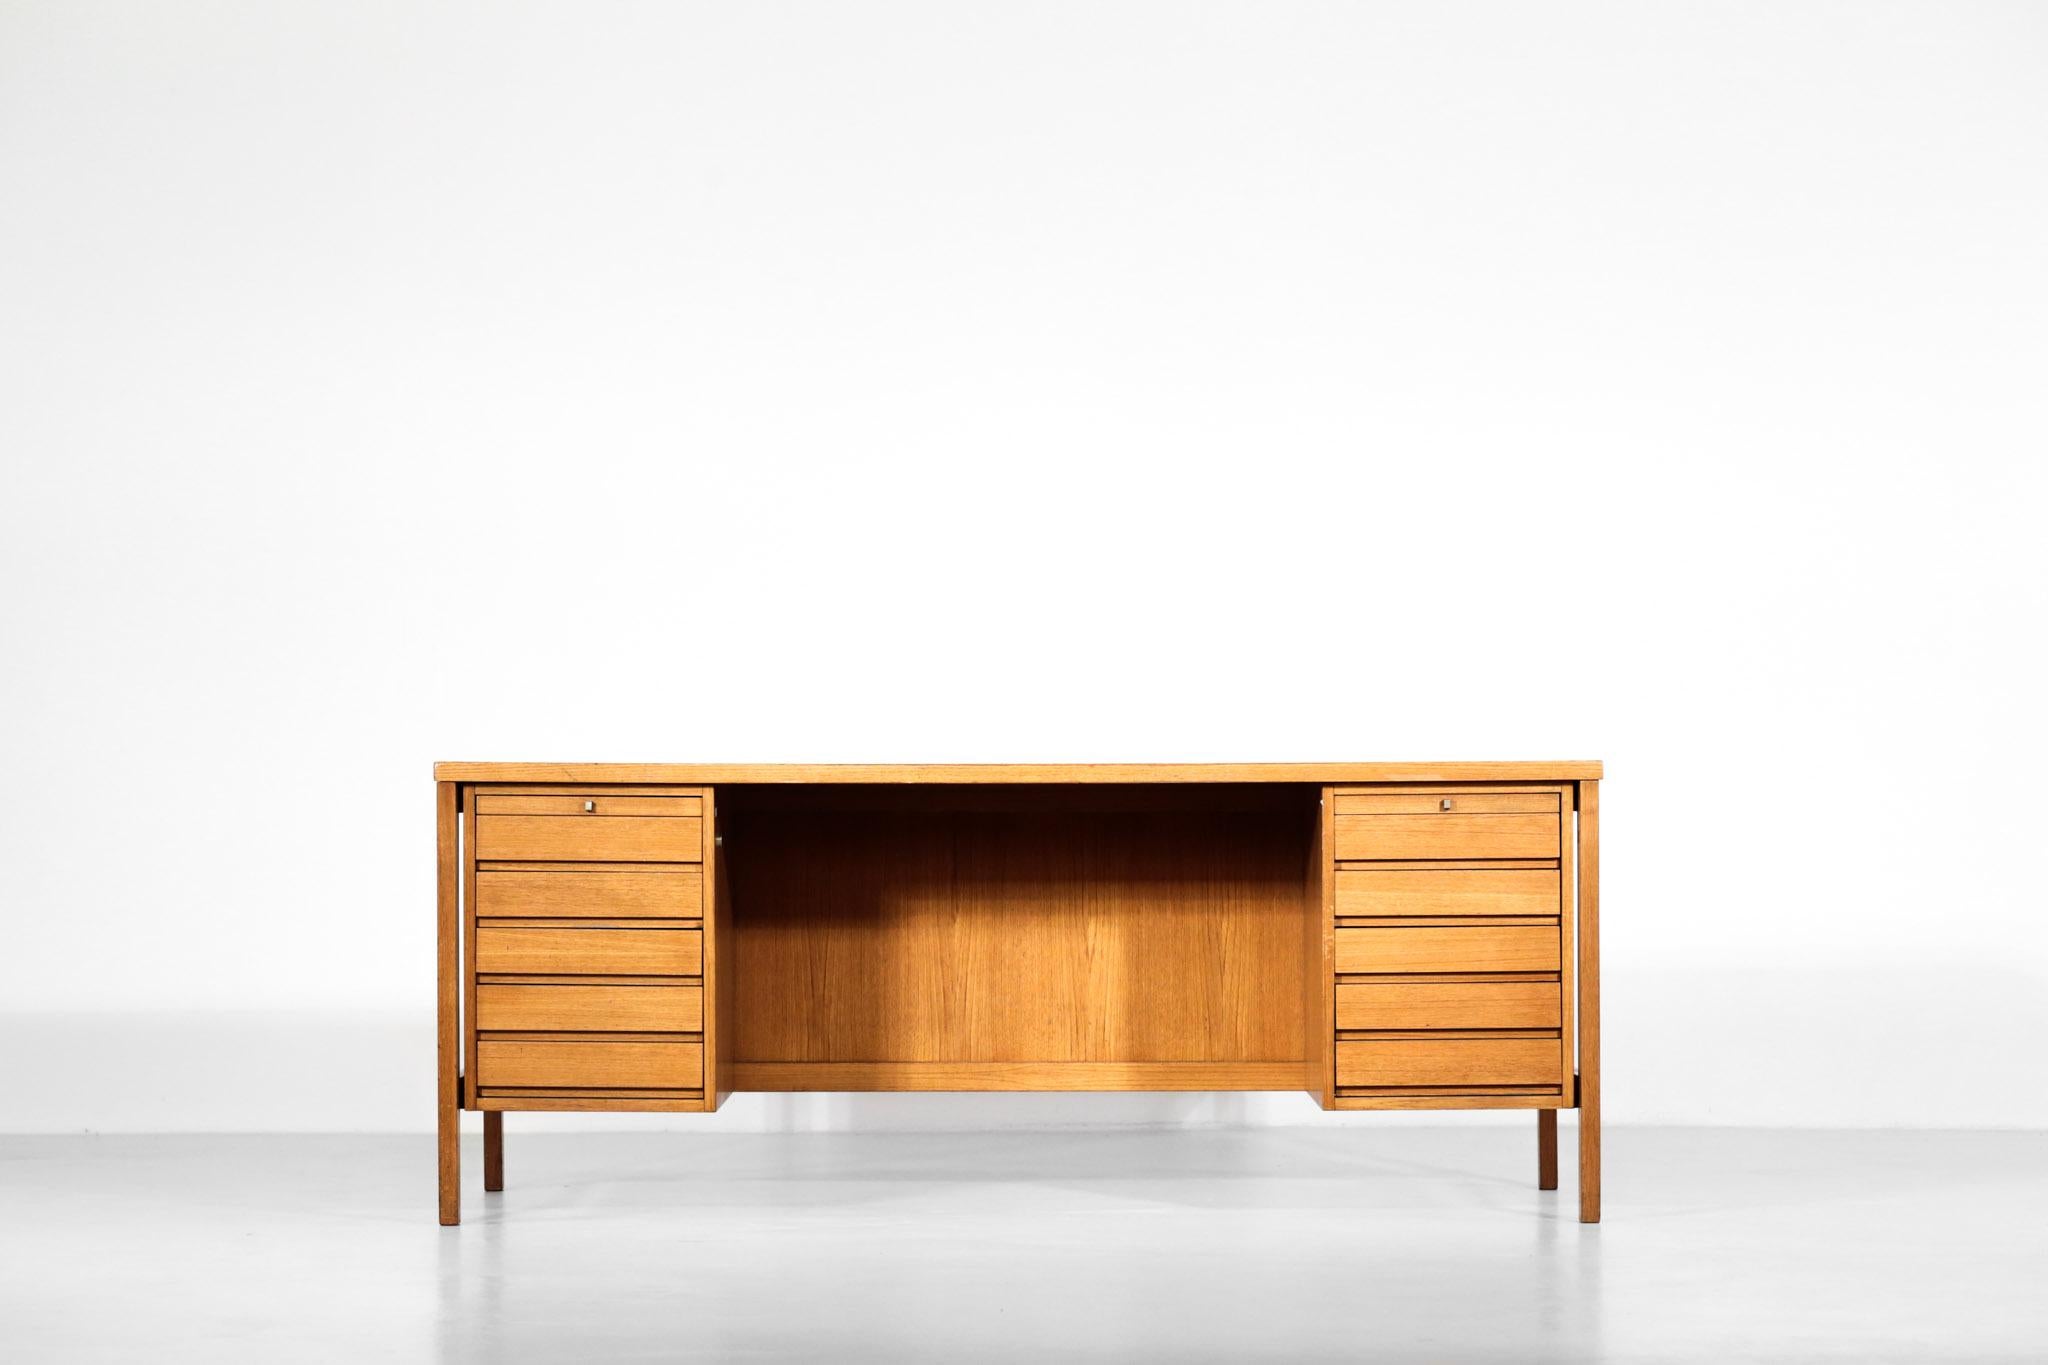 Dutch desk from 1970s. Rectangular top with 5 drawers on each side (no keys). In the style of Jules Wabbes (Belgian designer).